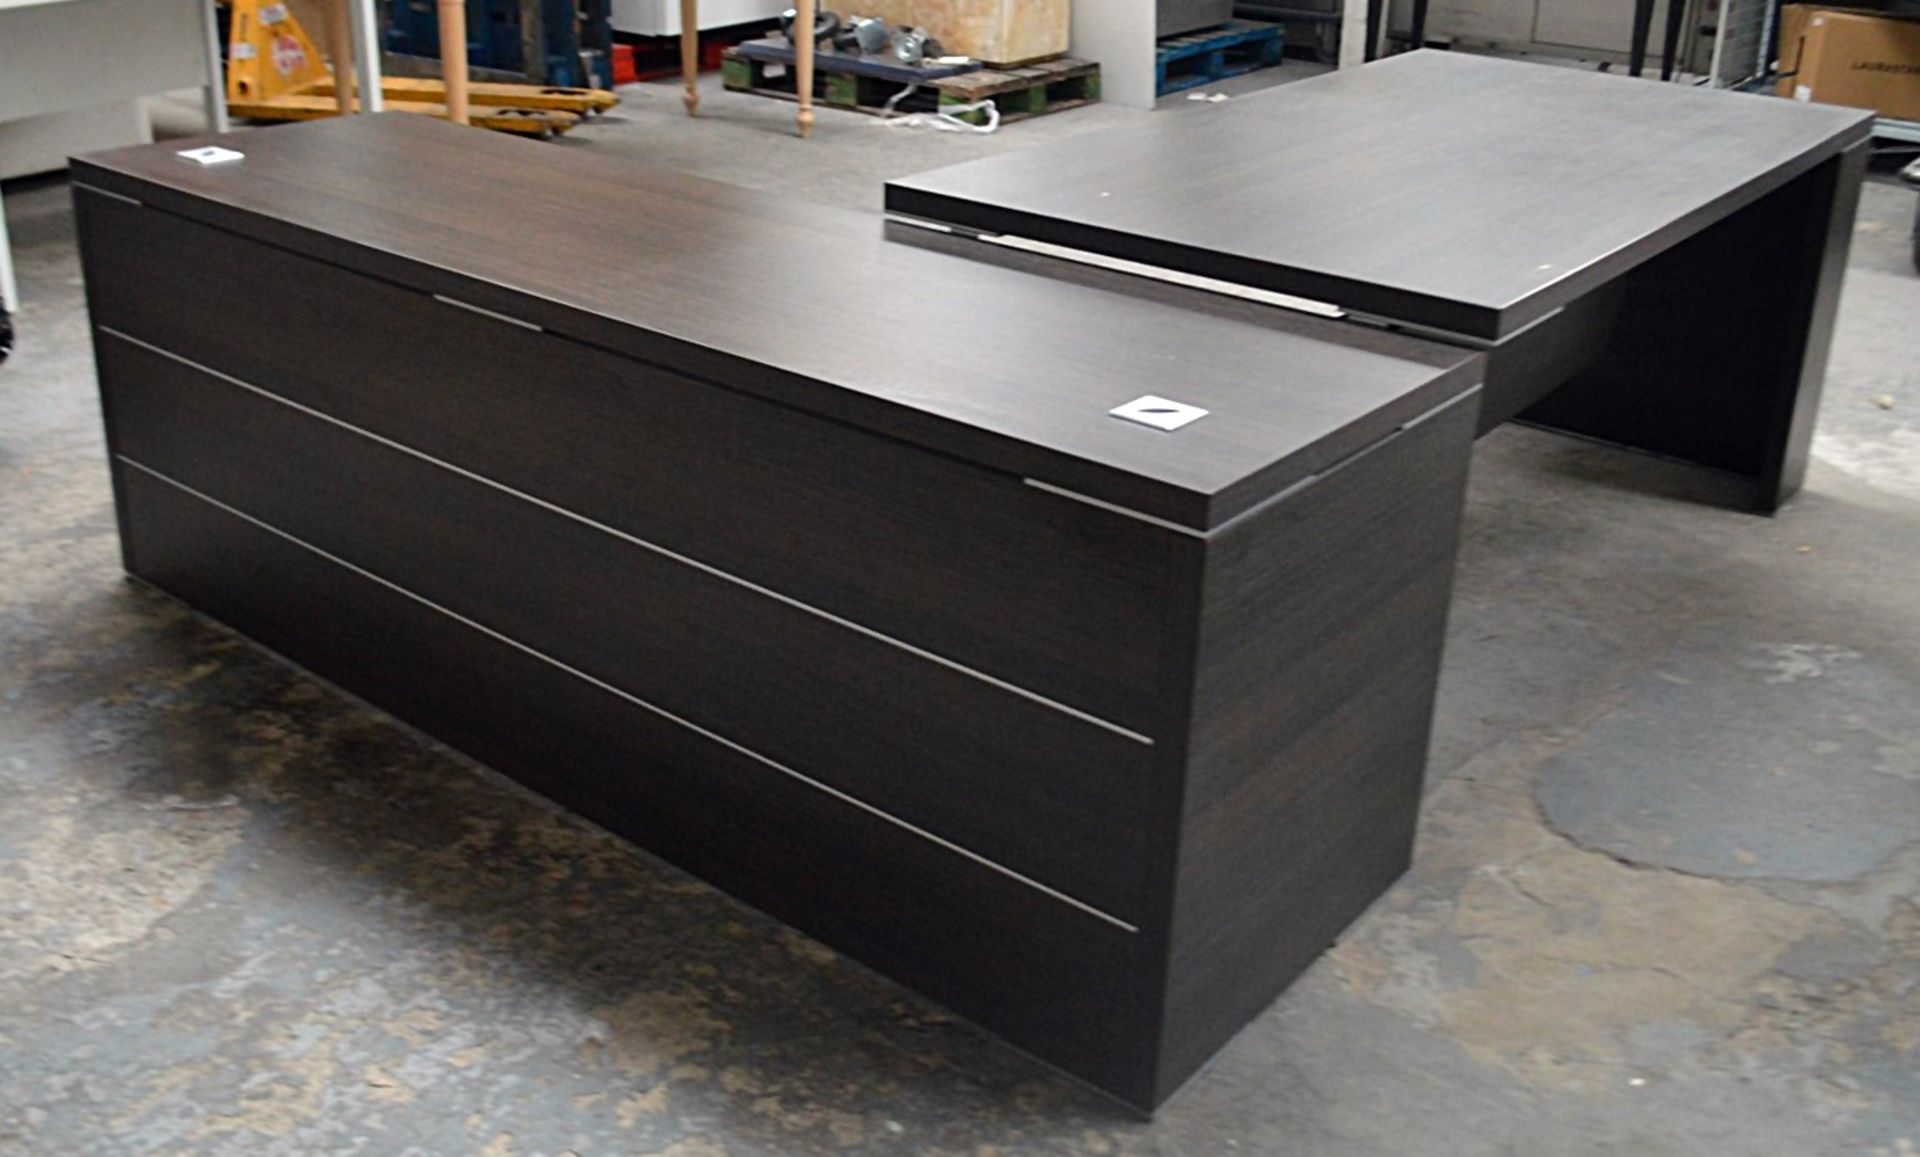 2 x Sections Of L-Shaped Reception Desk - Removed From A World-Renowned London Department Store